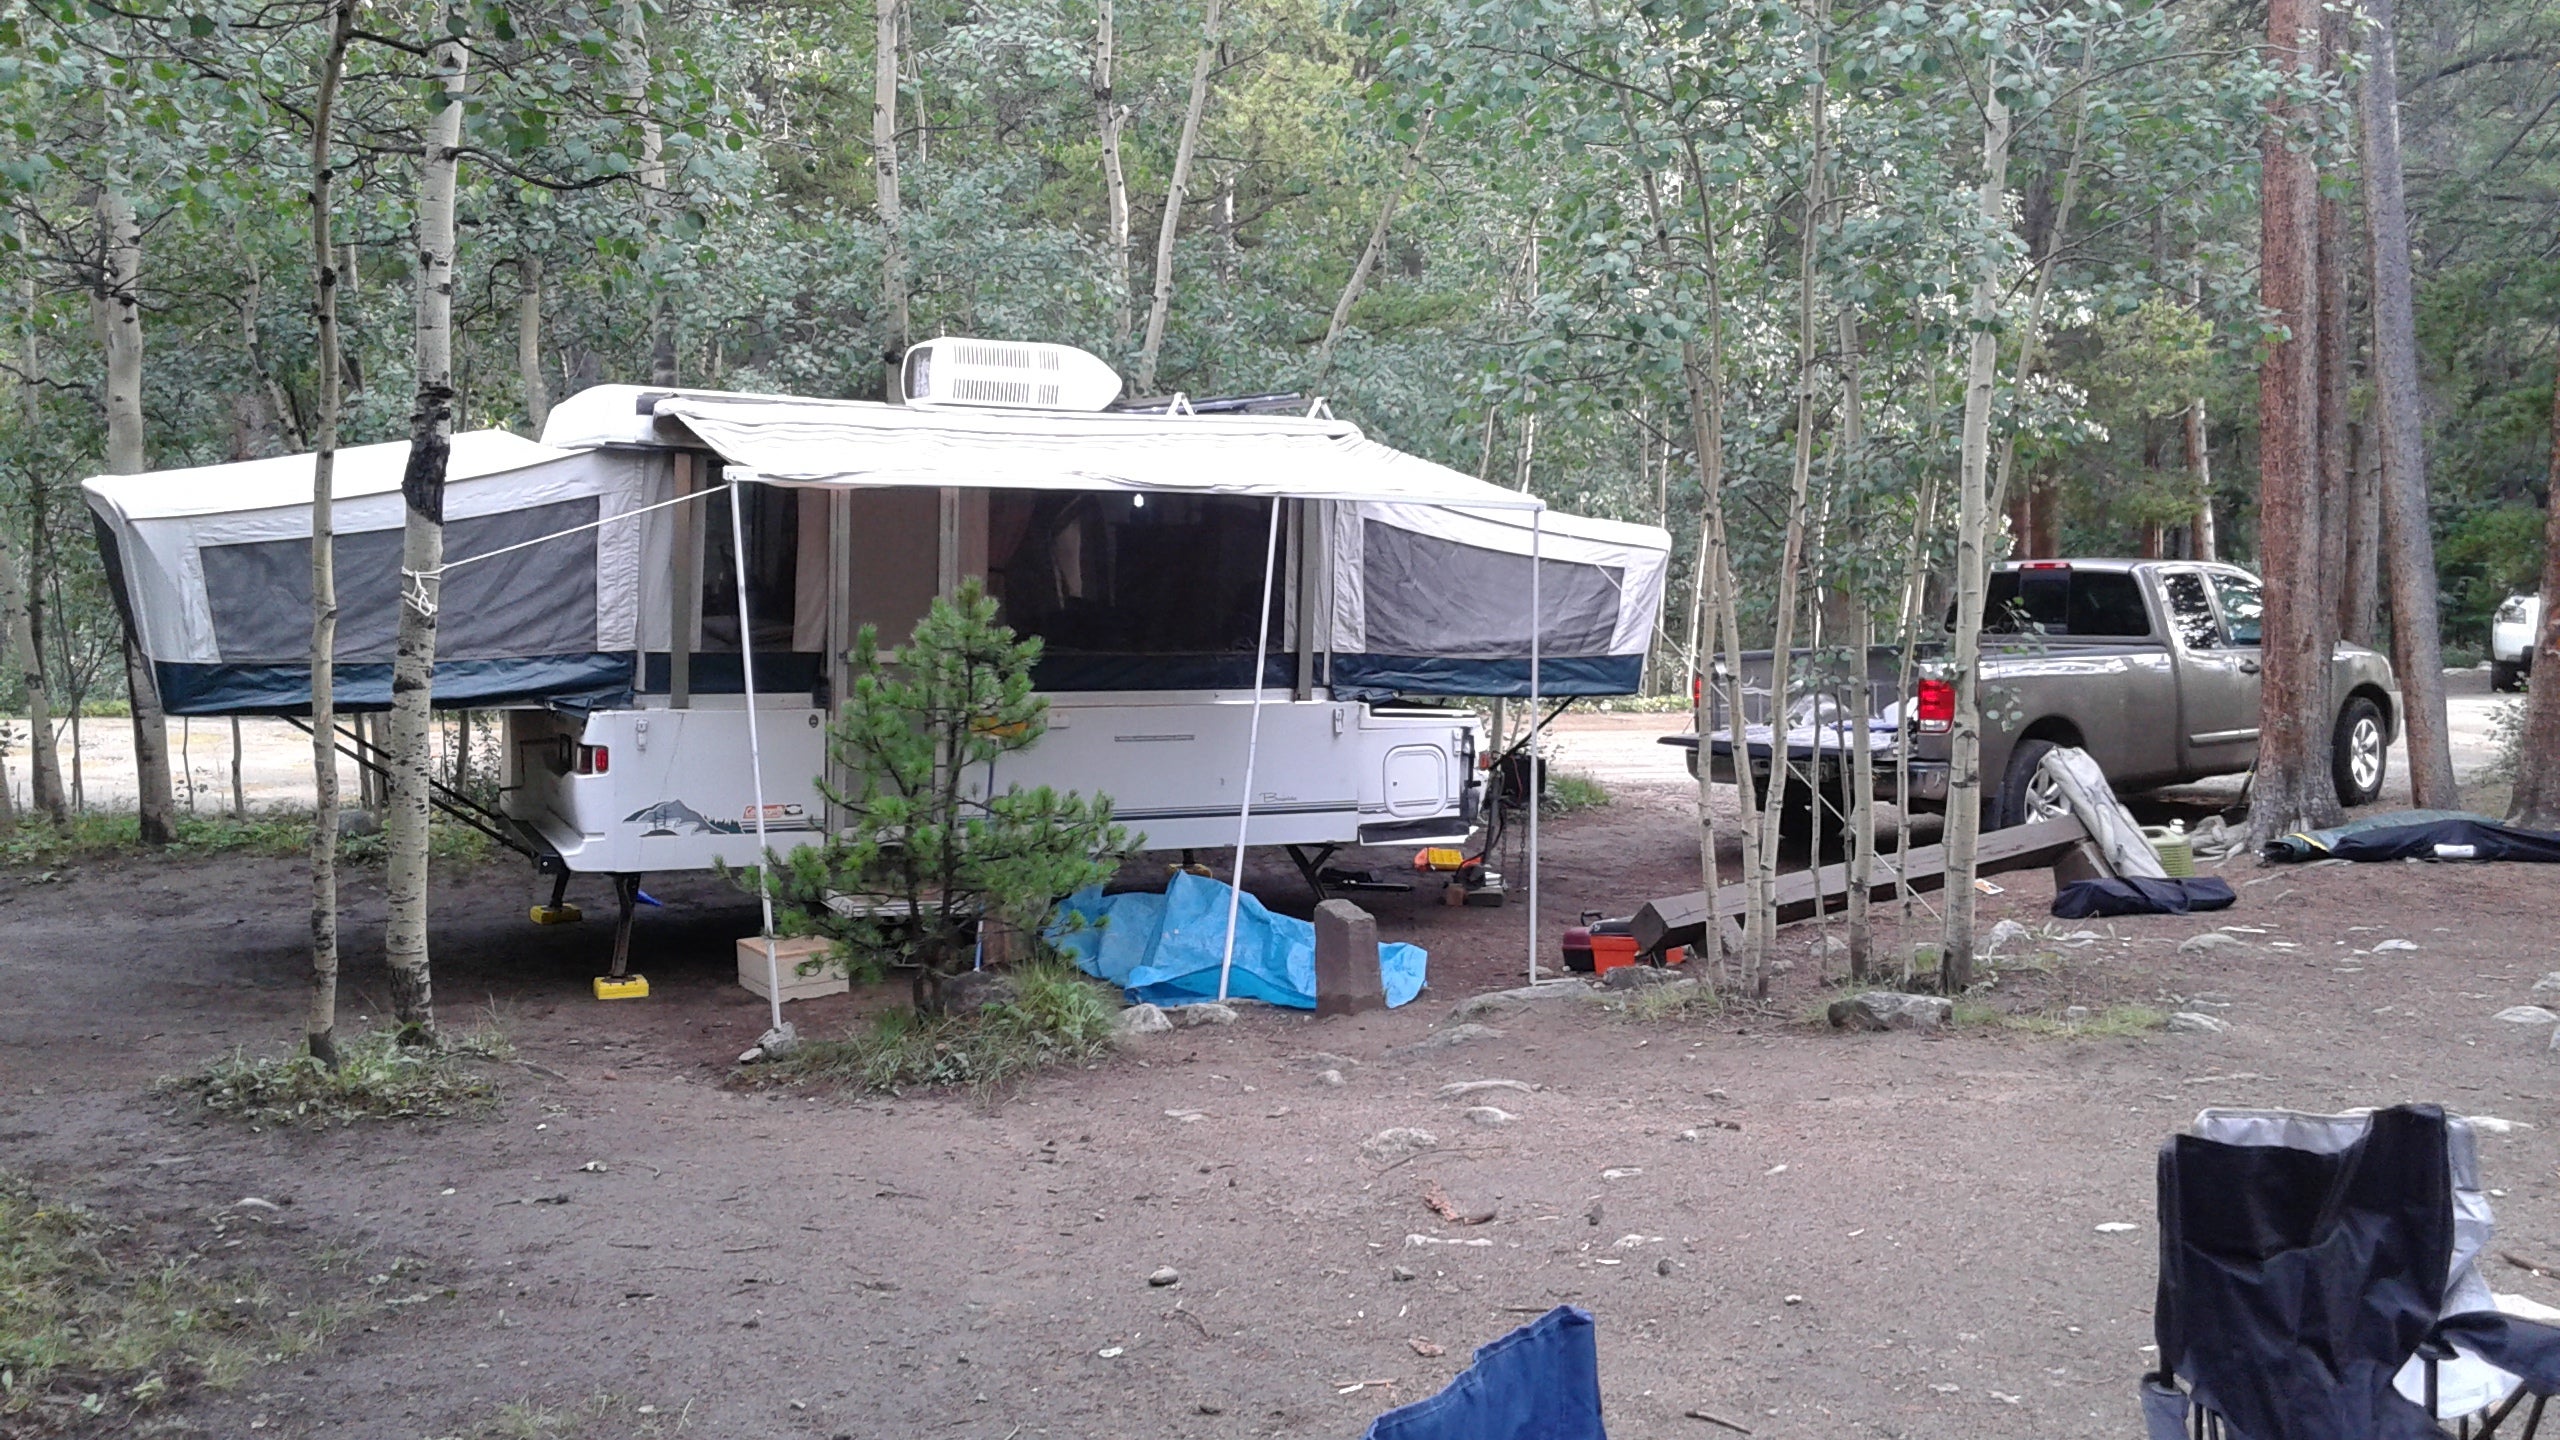 Camper submitted image from Collegiate Peaks - 5